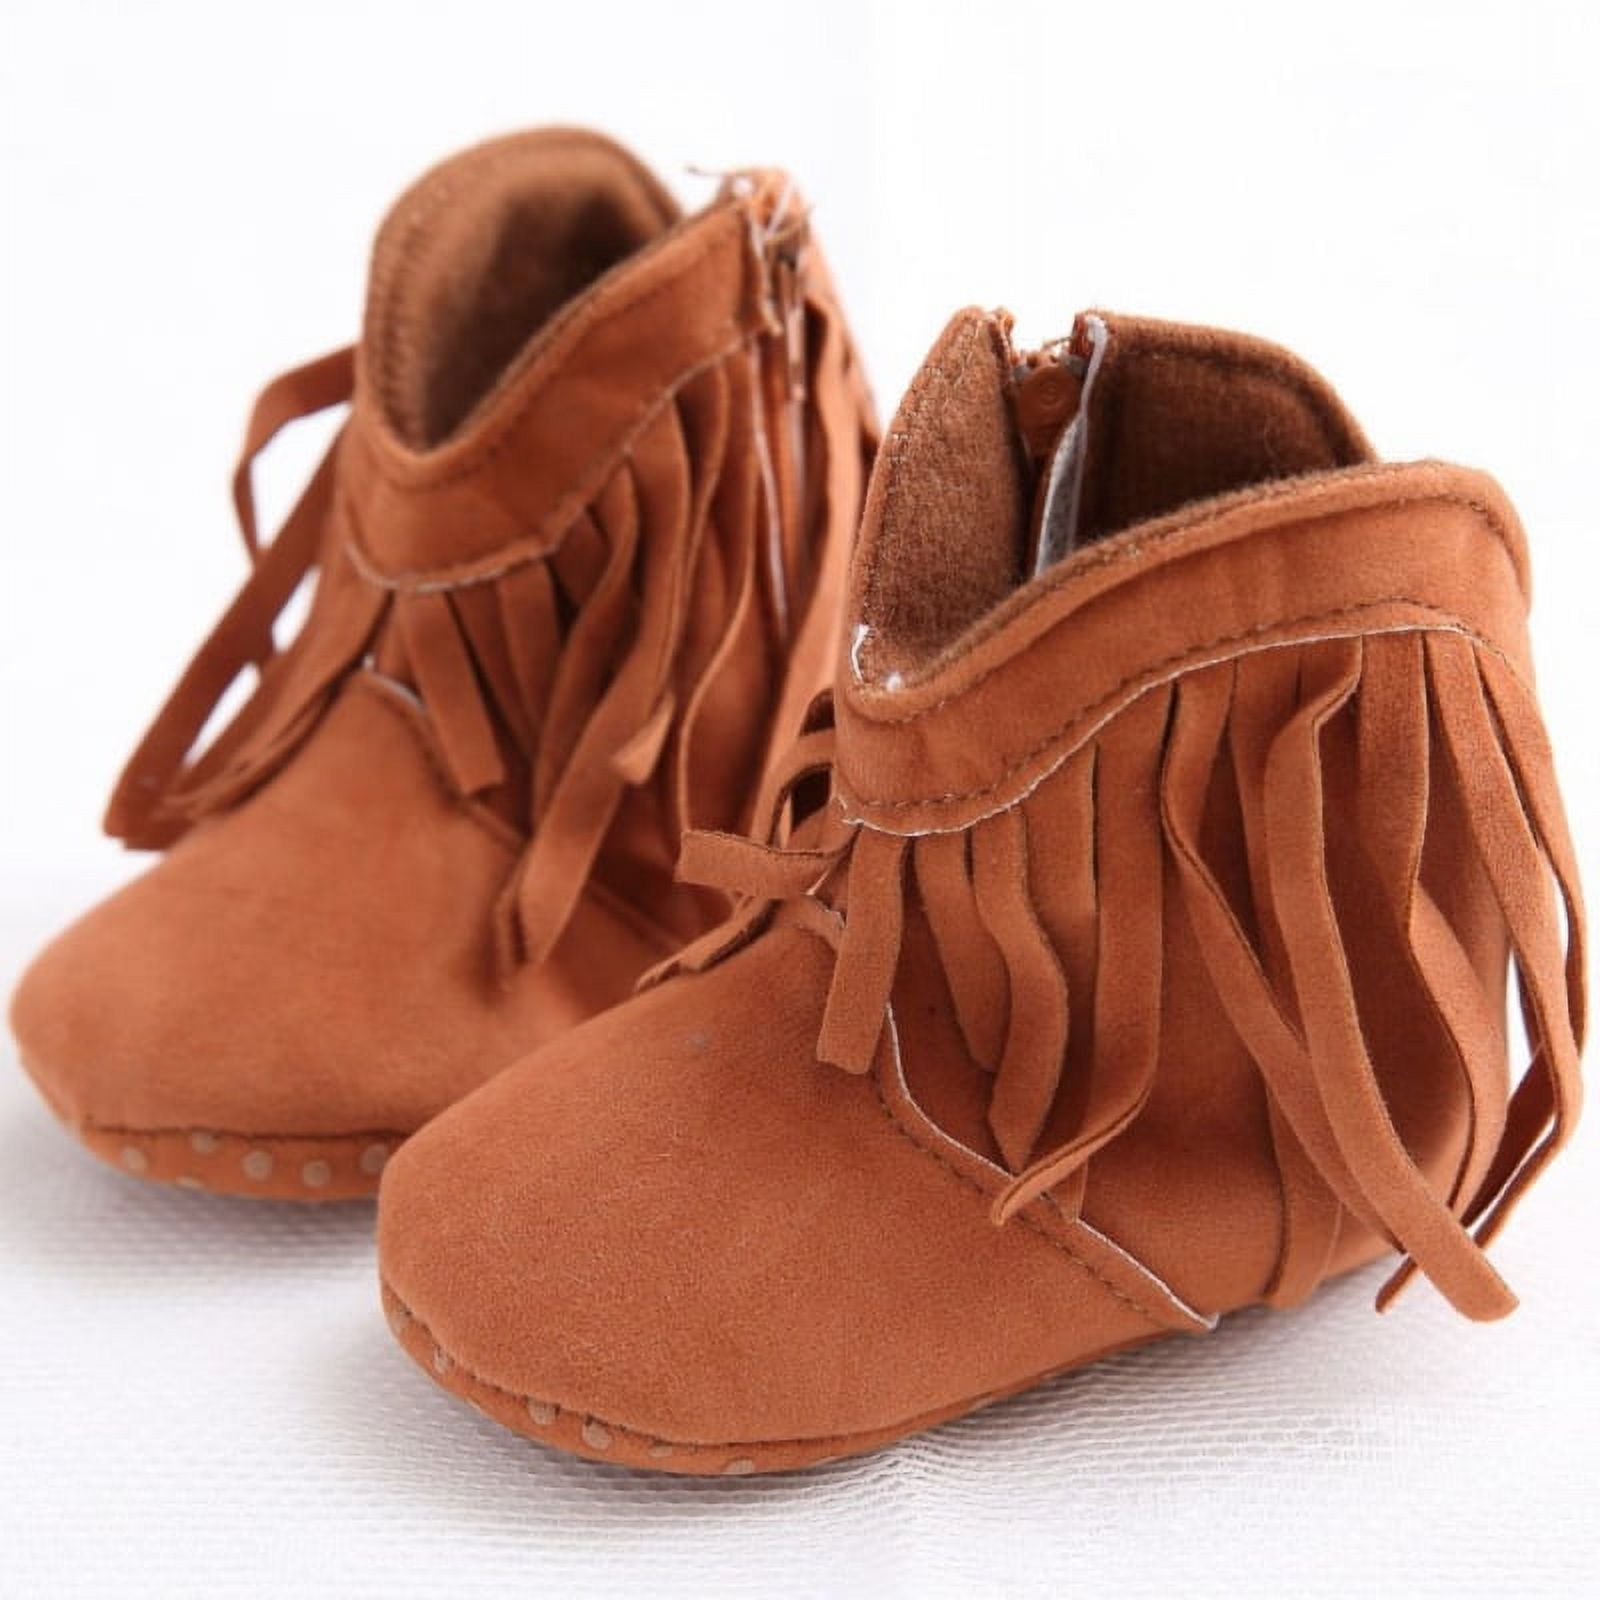 Fymall Infant Toddler Tassel Boots Baby Boy Girl Soft Soled Winter Shoes - image 1 of 5